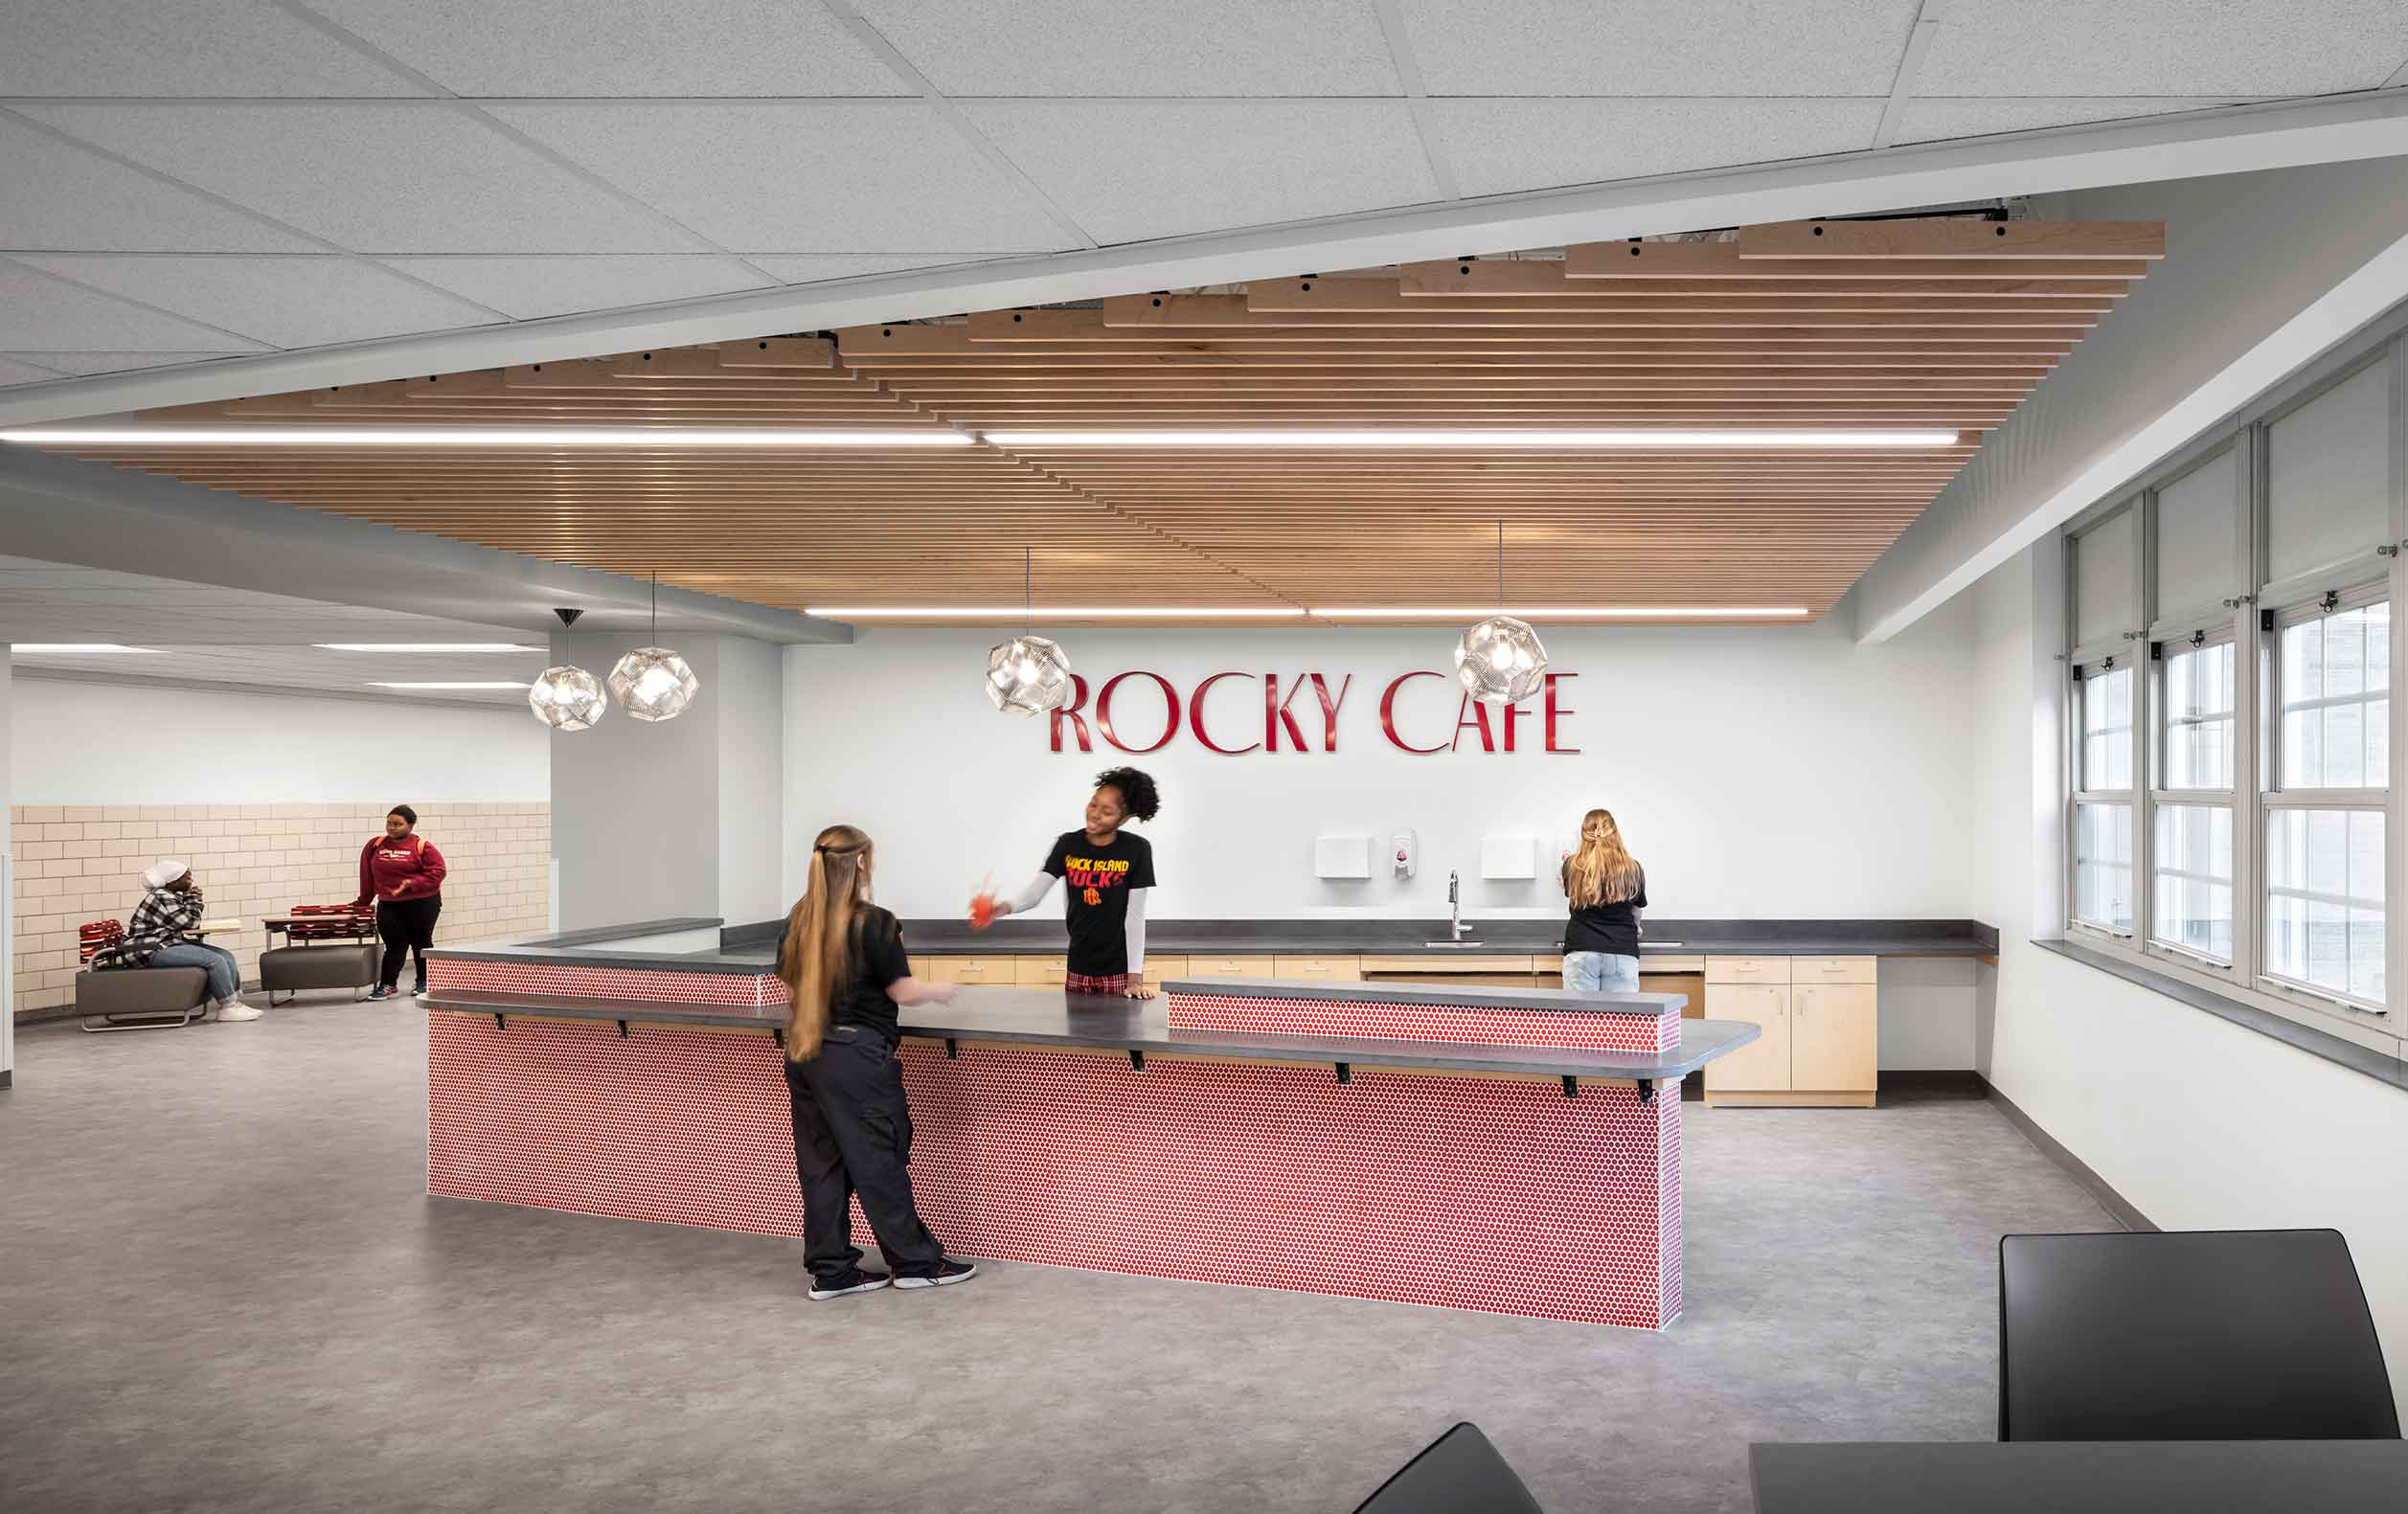 High school students behind counter with Rocky Cafe sign on back wall and wooden ceiling slats